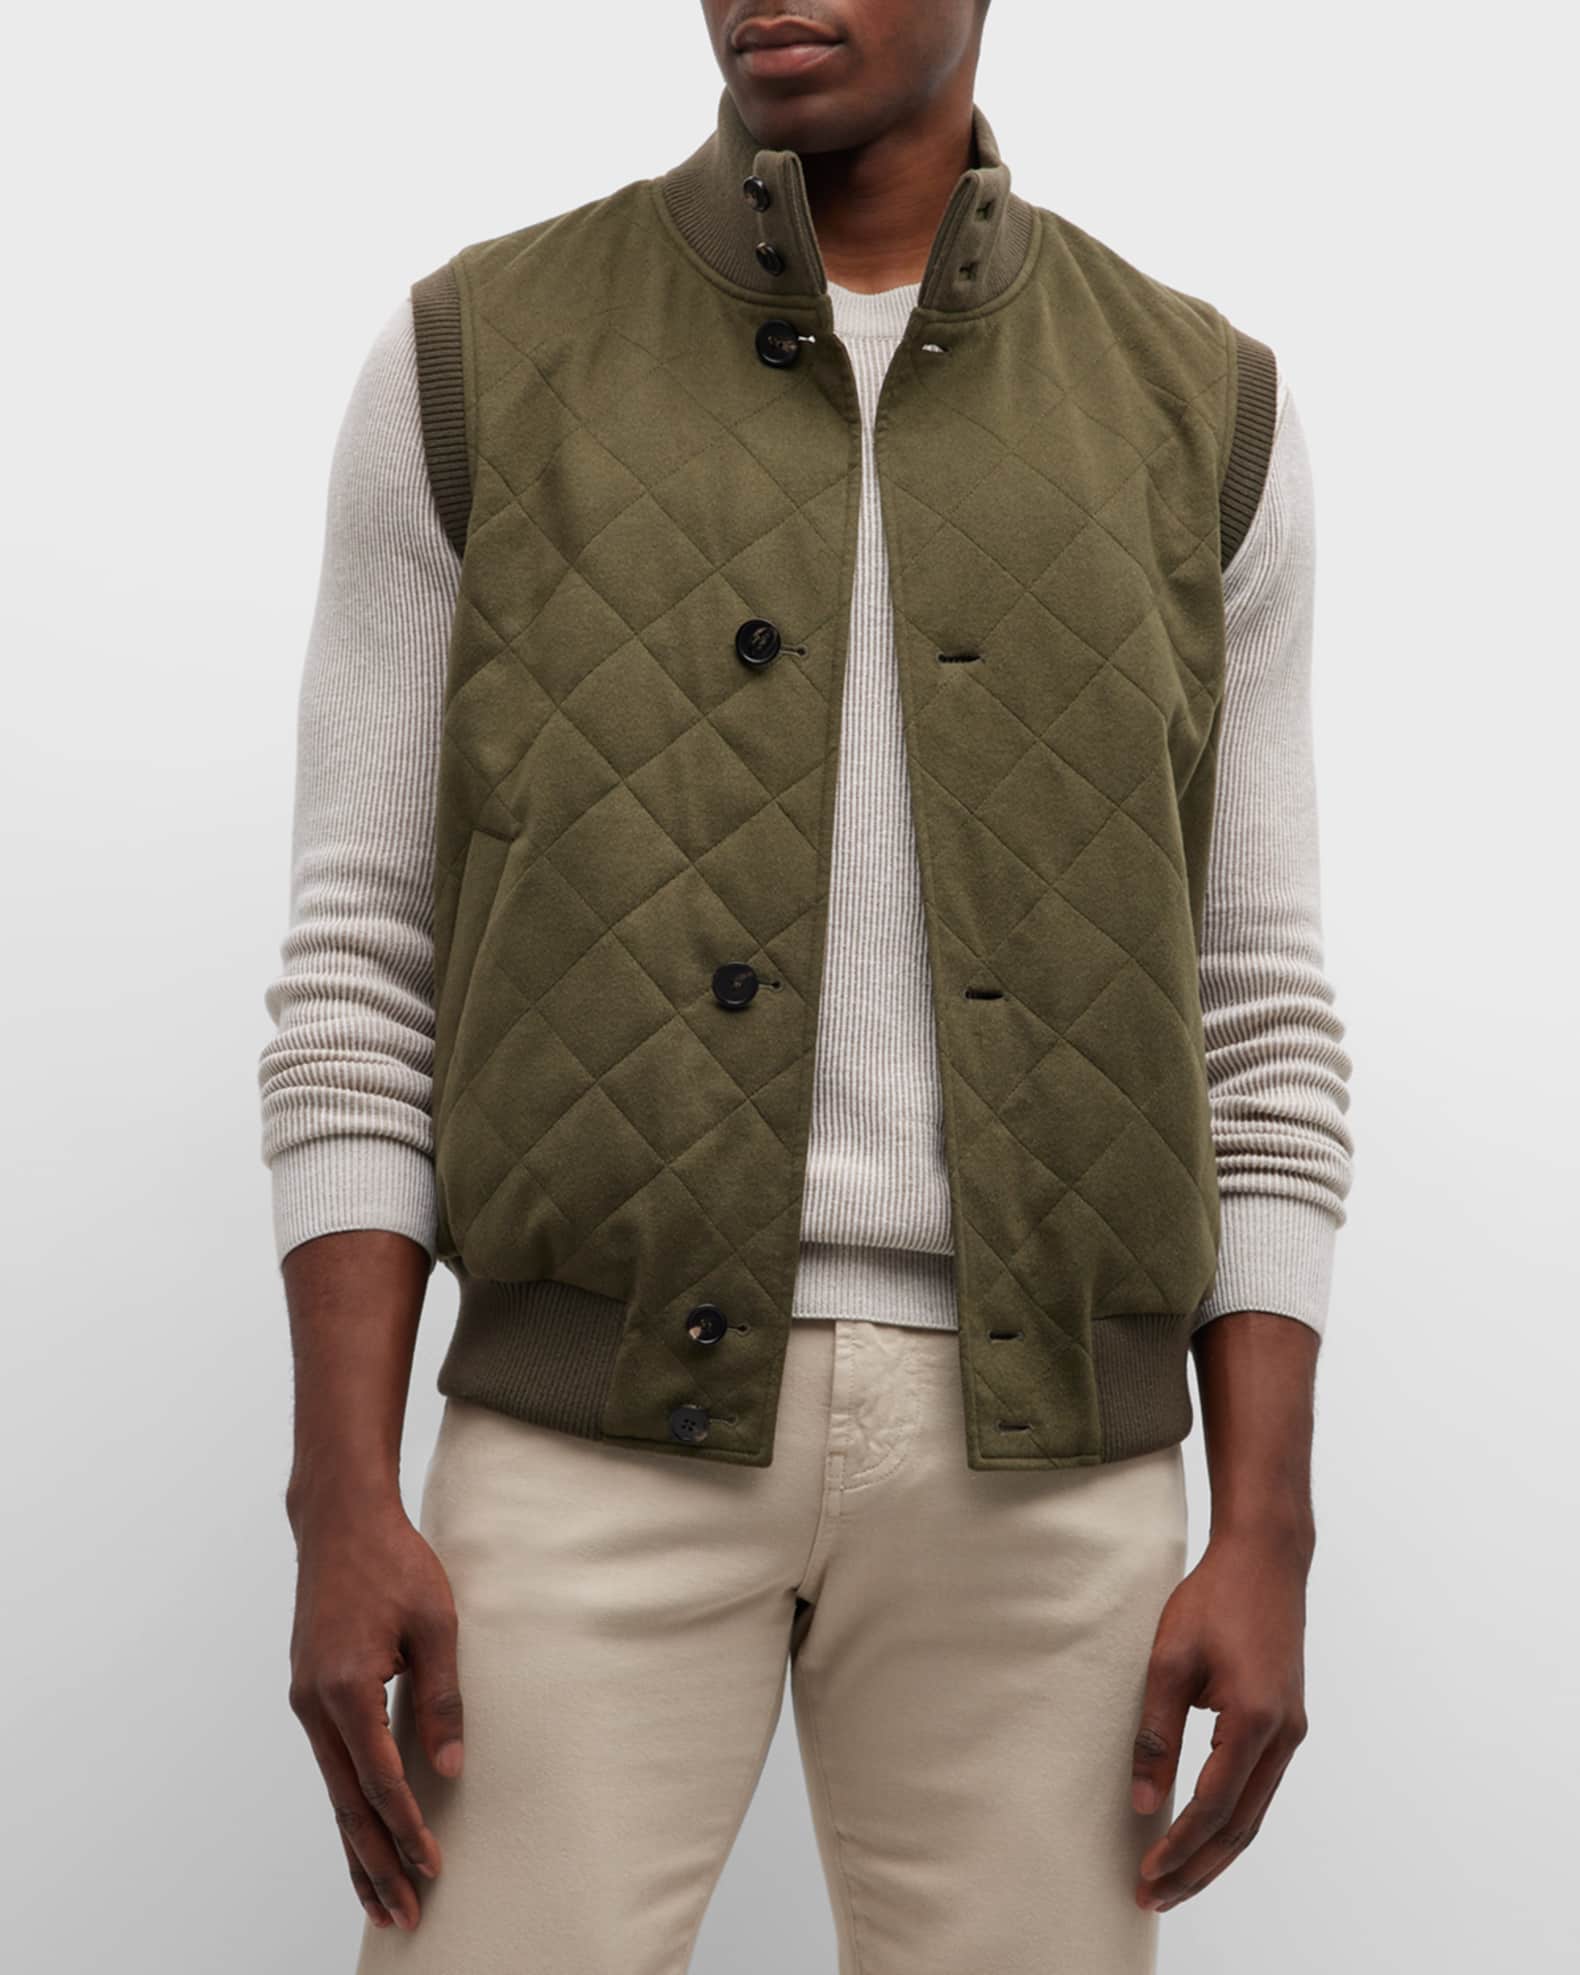 youth loser quilting vest